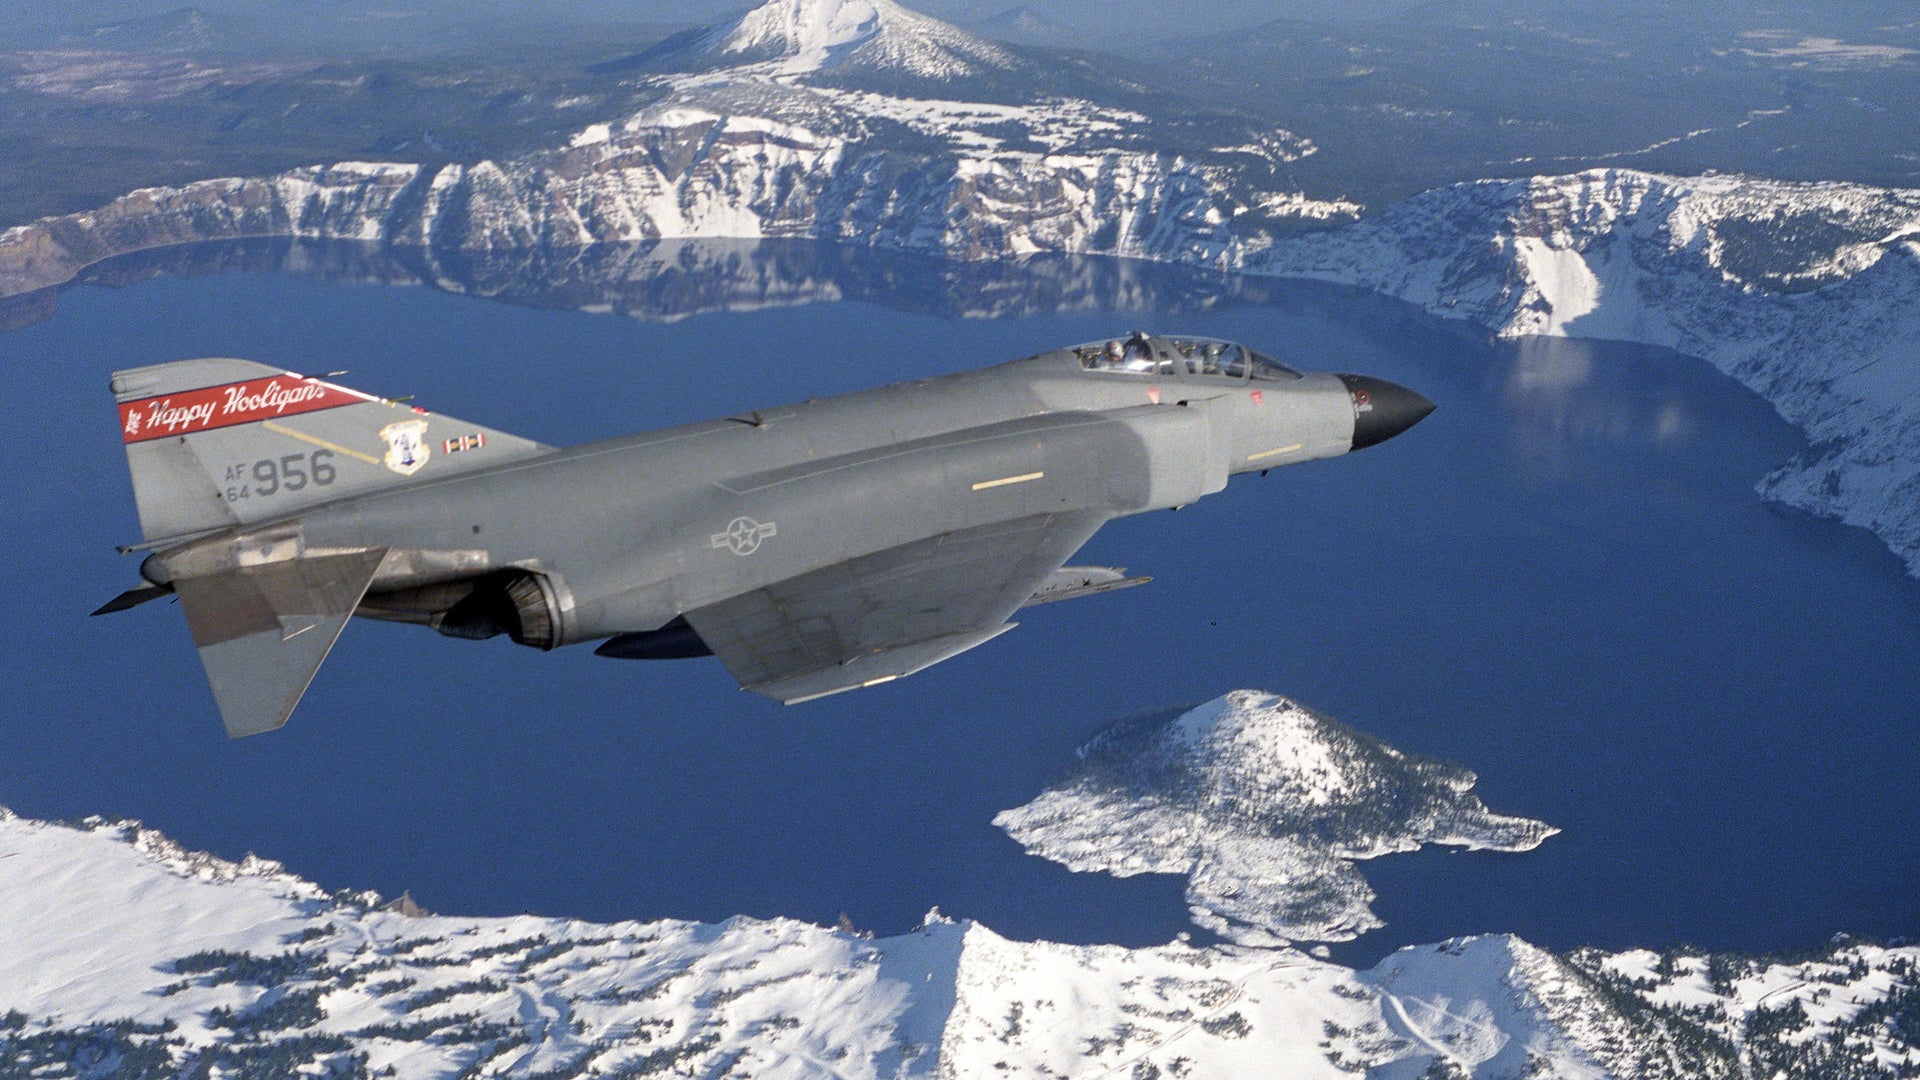 A U.S. Air Force F-4D Phantom II aircraft assigned to the 119th Fighter Wing, North Dakota Air National Guard, flies over Crater Lake, Oregon. (Larry Harrington/U.S. Air Force)